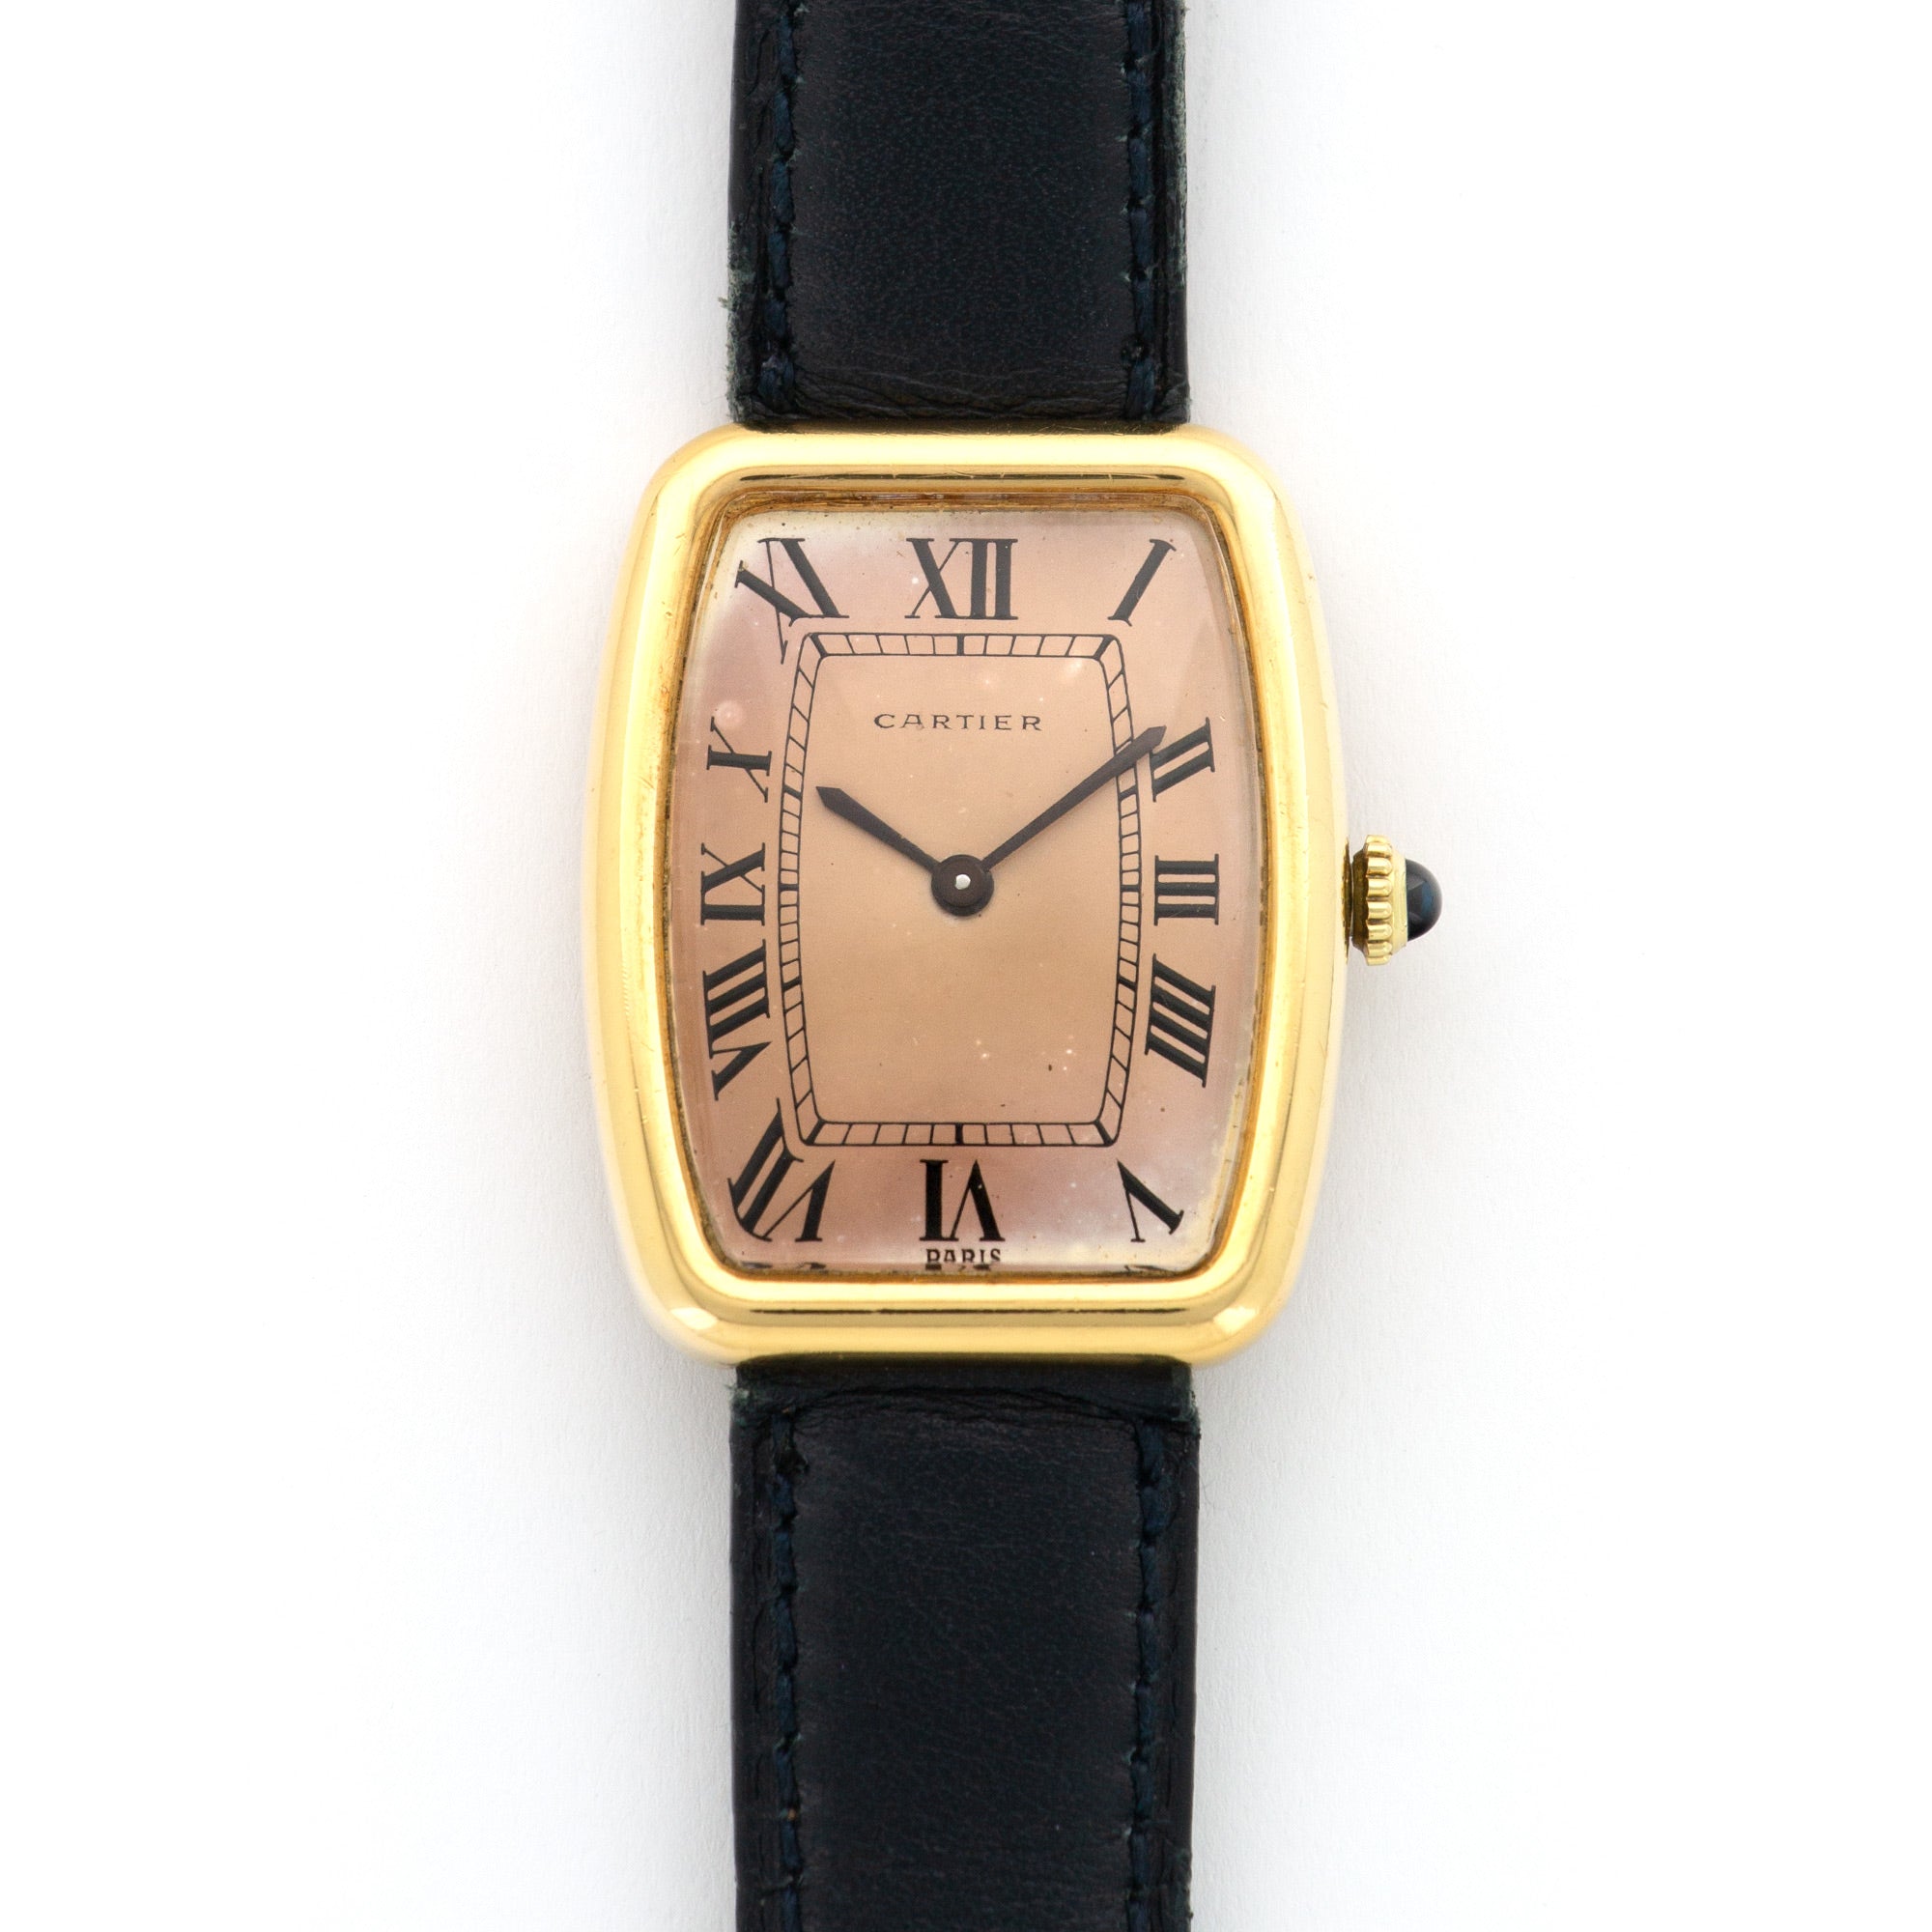 Cartier - Cartier Yellow Gold Tank Faberge Watch - The Keystone Watches